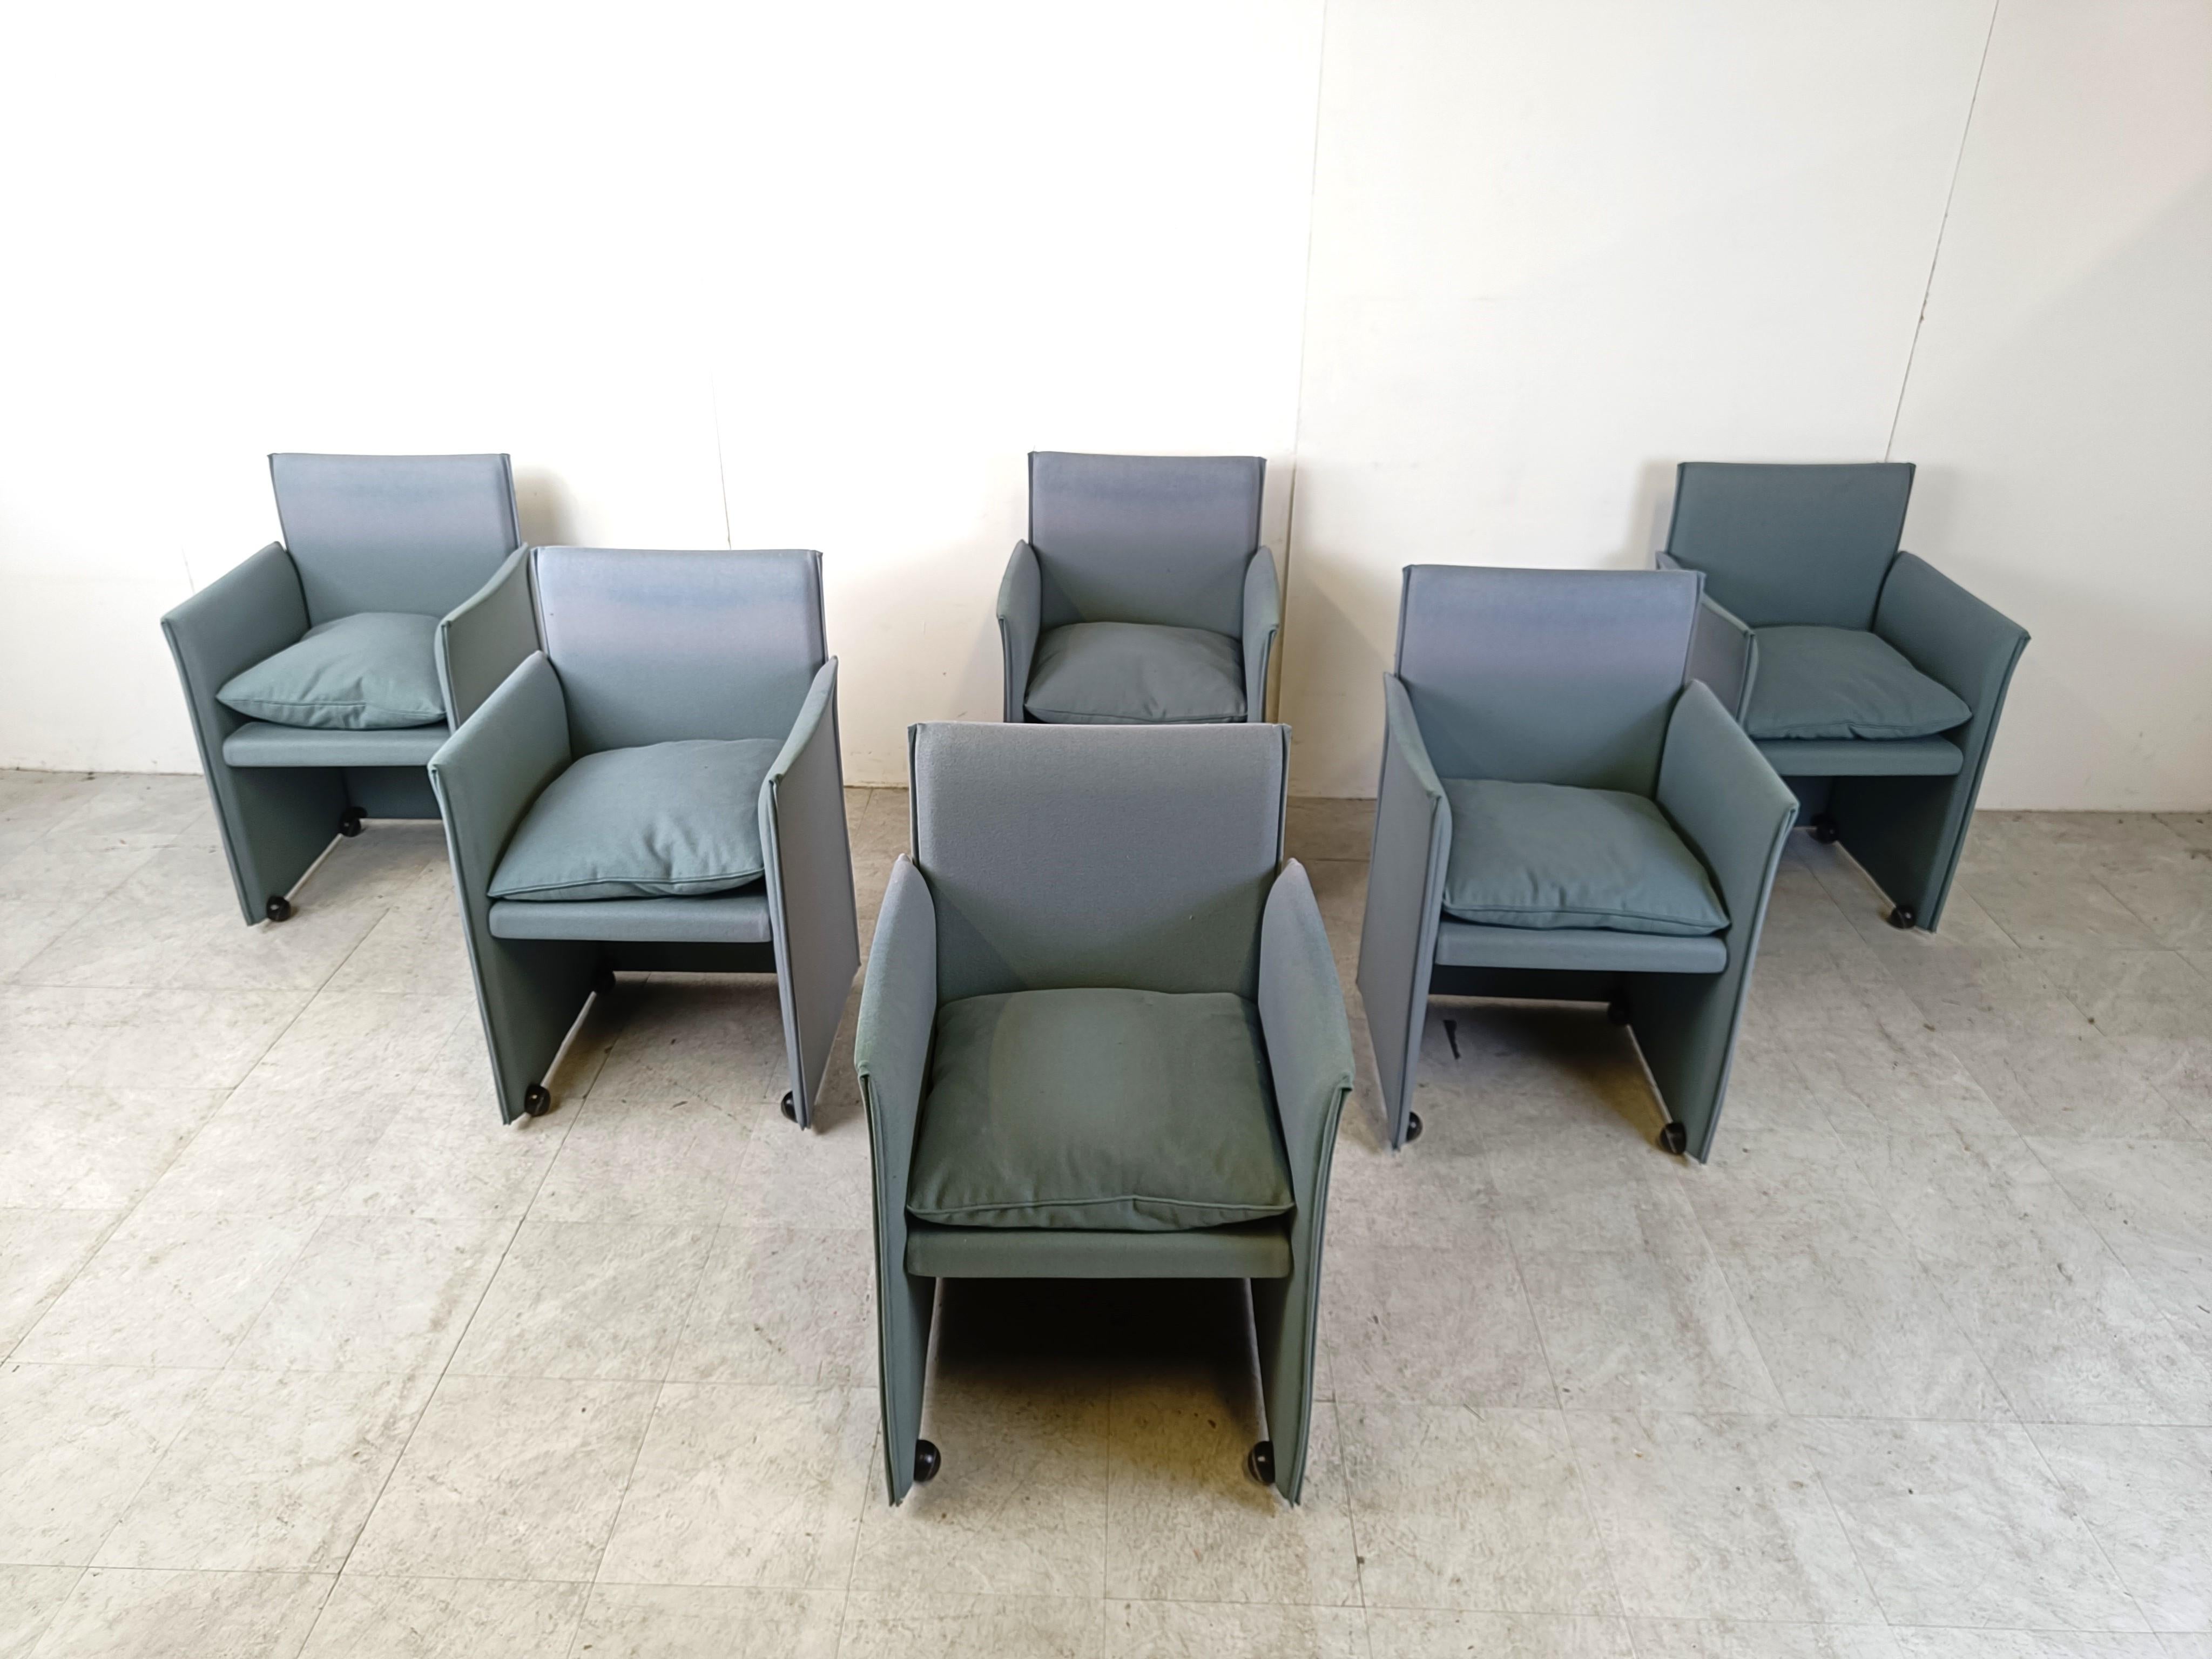 Blue fabric 401 break chairs designed by Mario Bellini and produced by Cassina.

The chairs have 4 casters which make them glide smoothly and are well integrated in the design.

1990s - Italy

Good condition, the colour is slightly faded but still